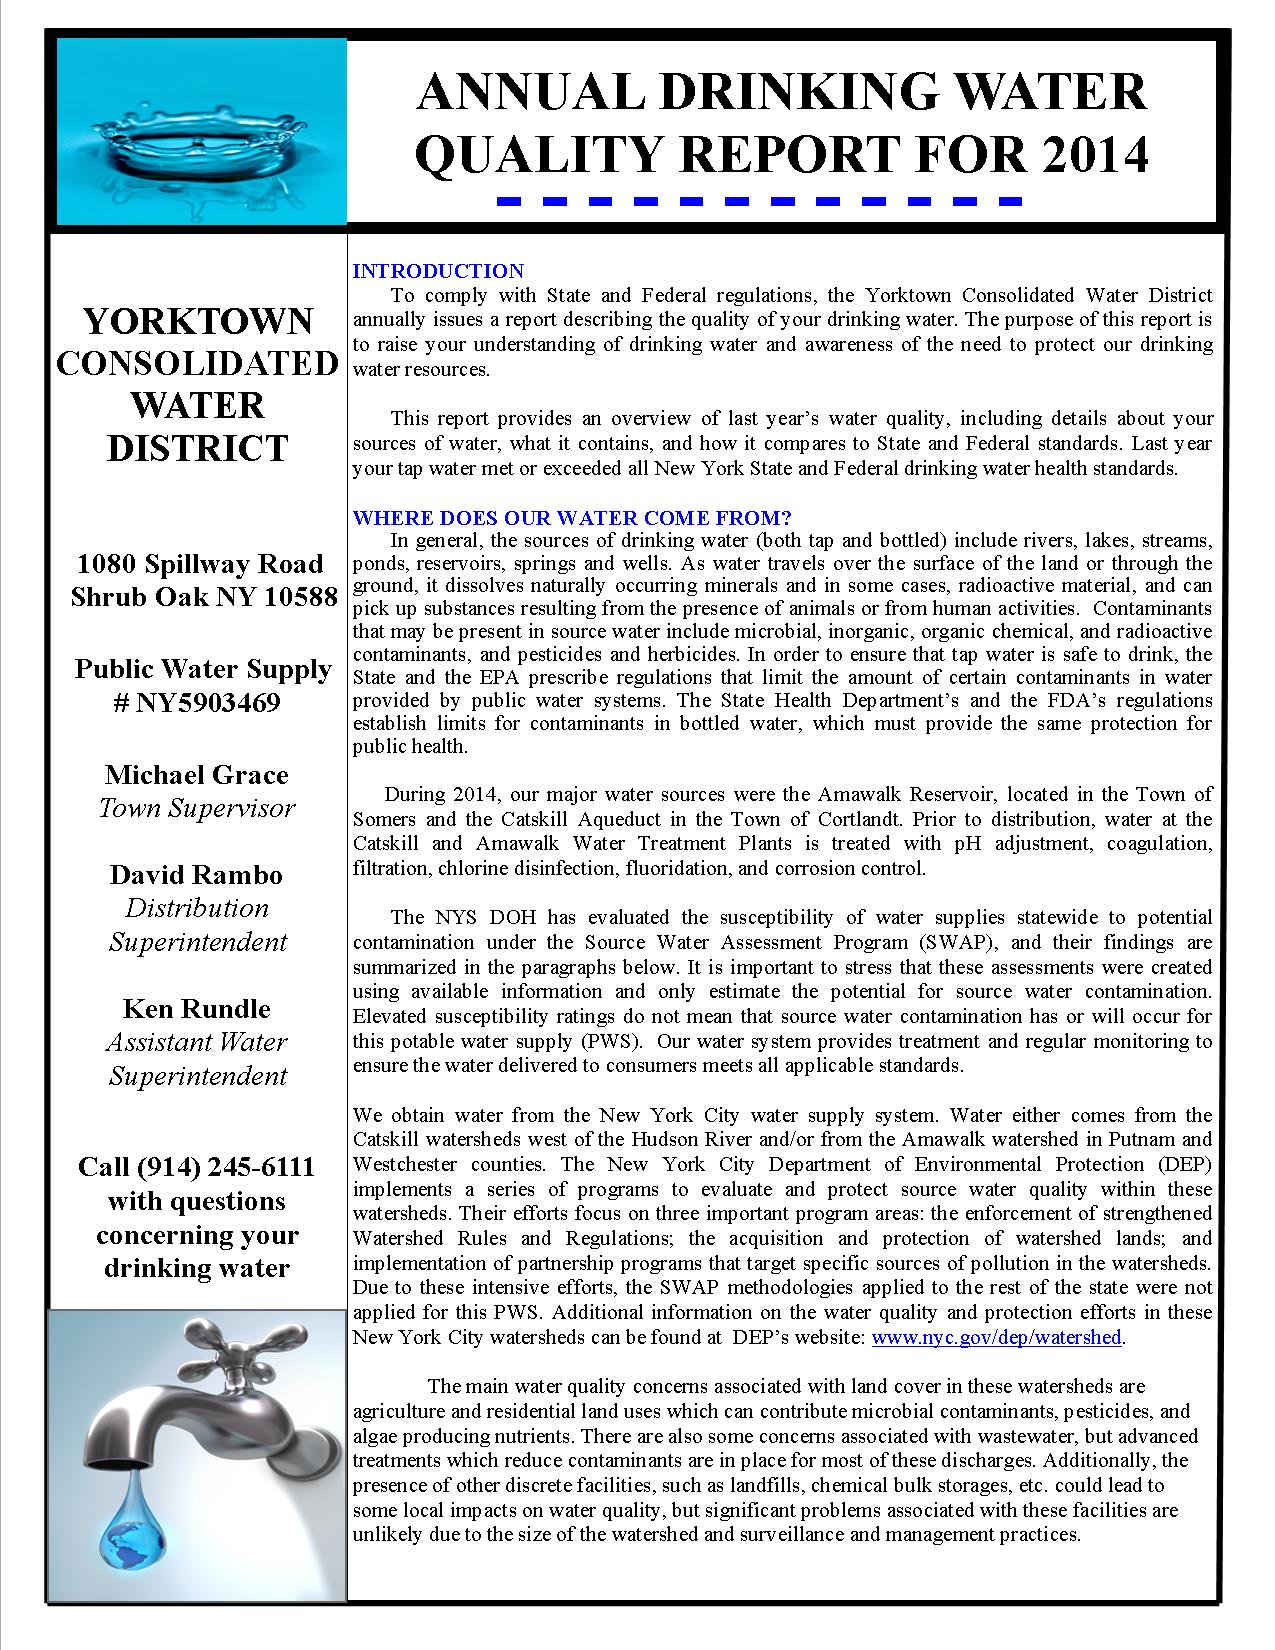 yorktown-water-dept-releases-annual-water-quality-reports-town-of